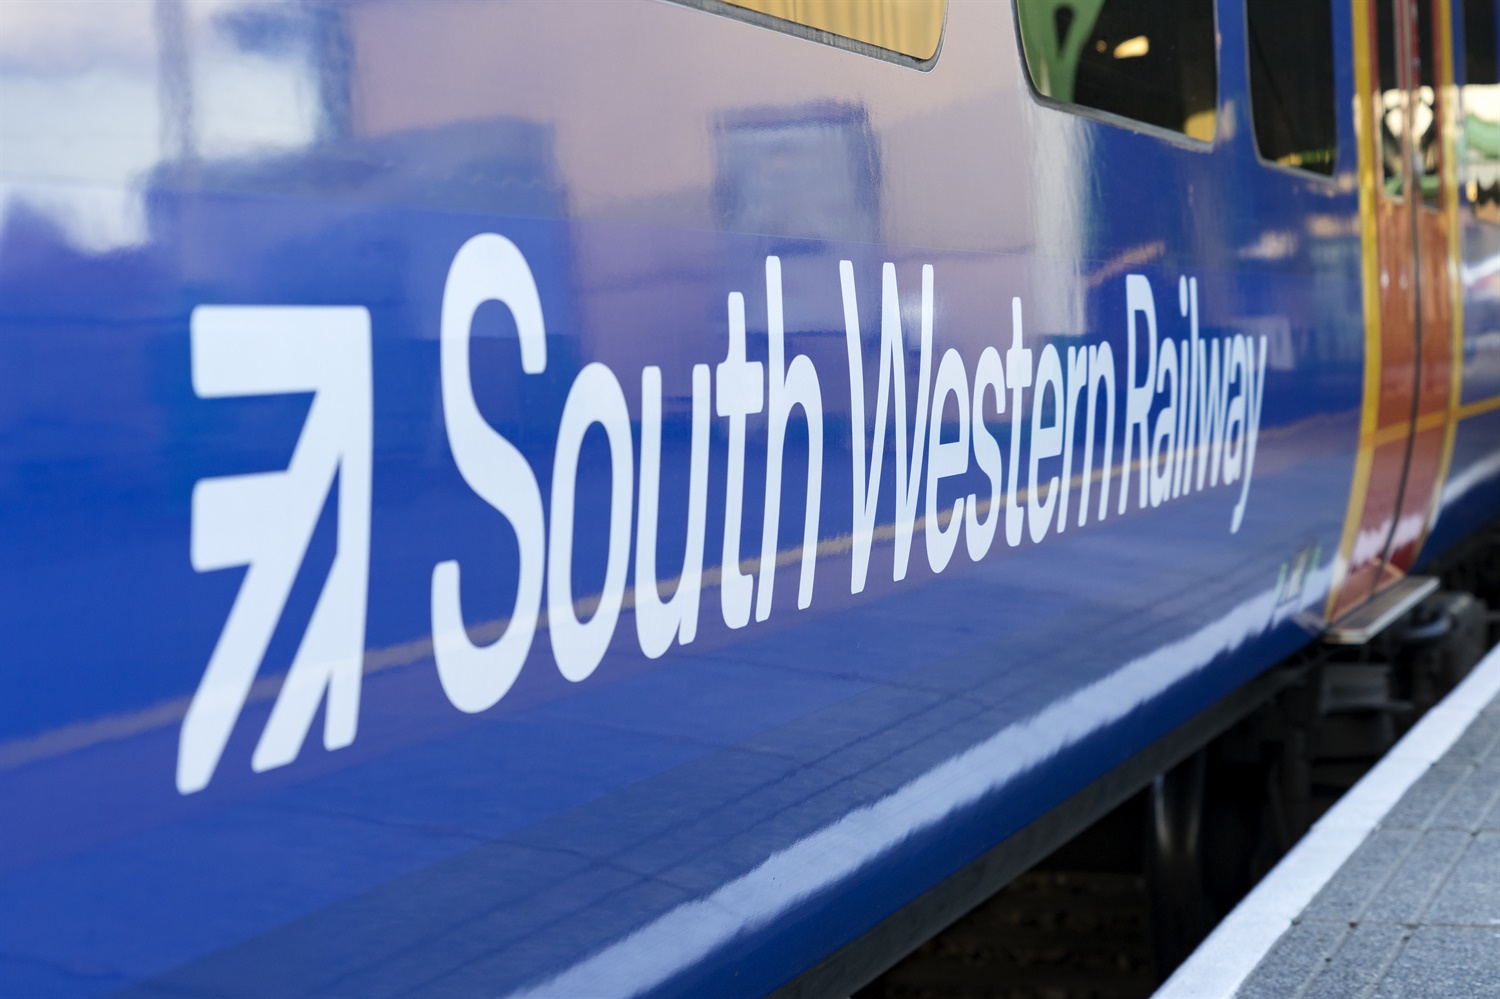 Network Rail accepts role in ‘unacceptable SWR disruption’ linked to poor recovery plans